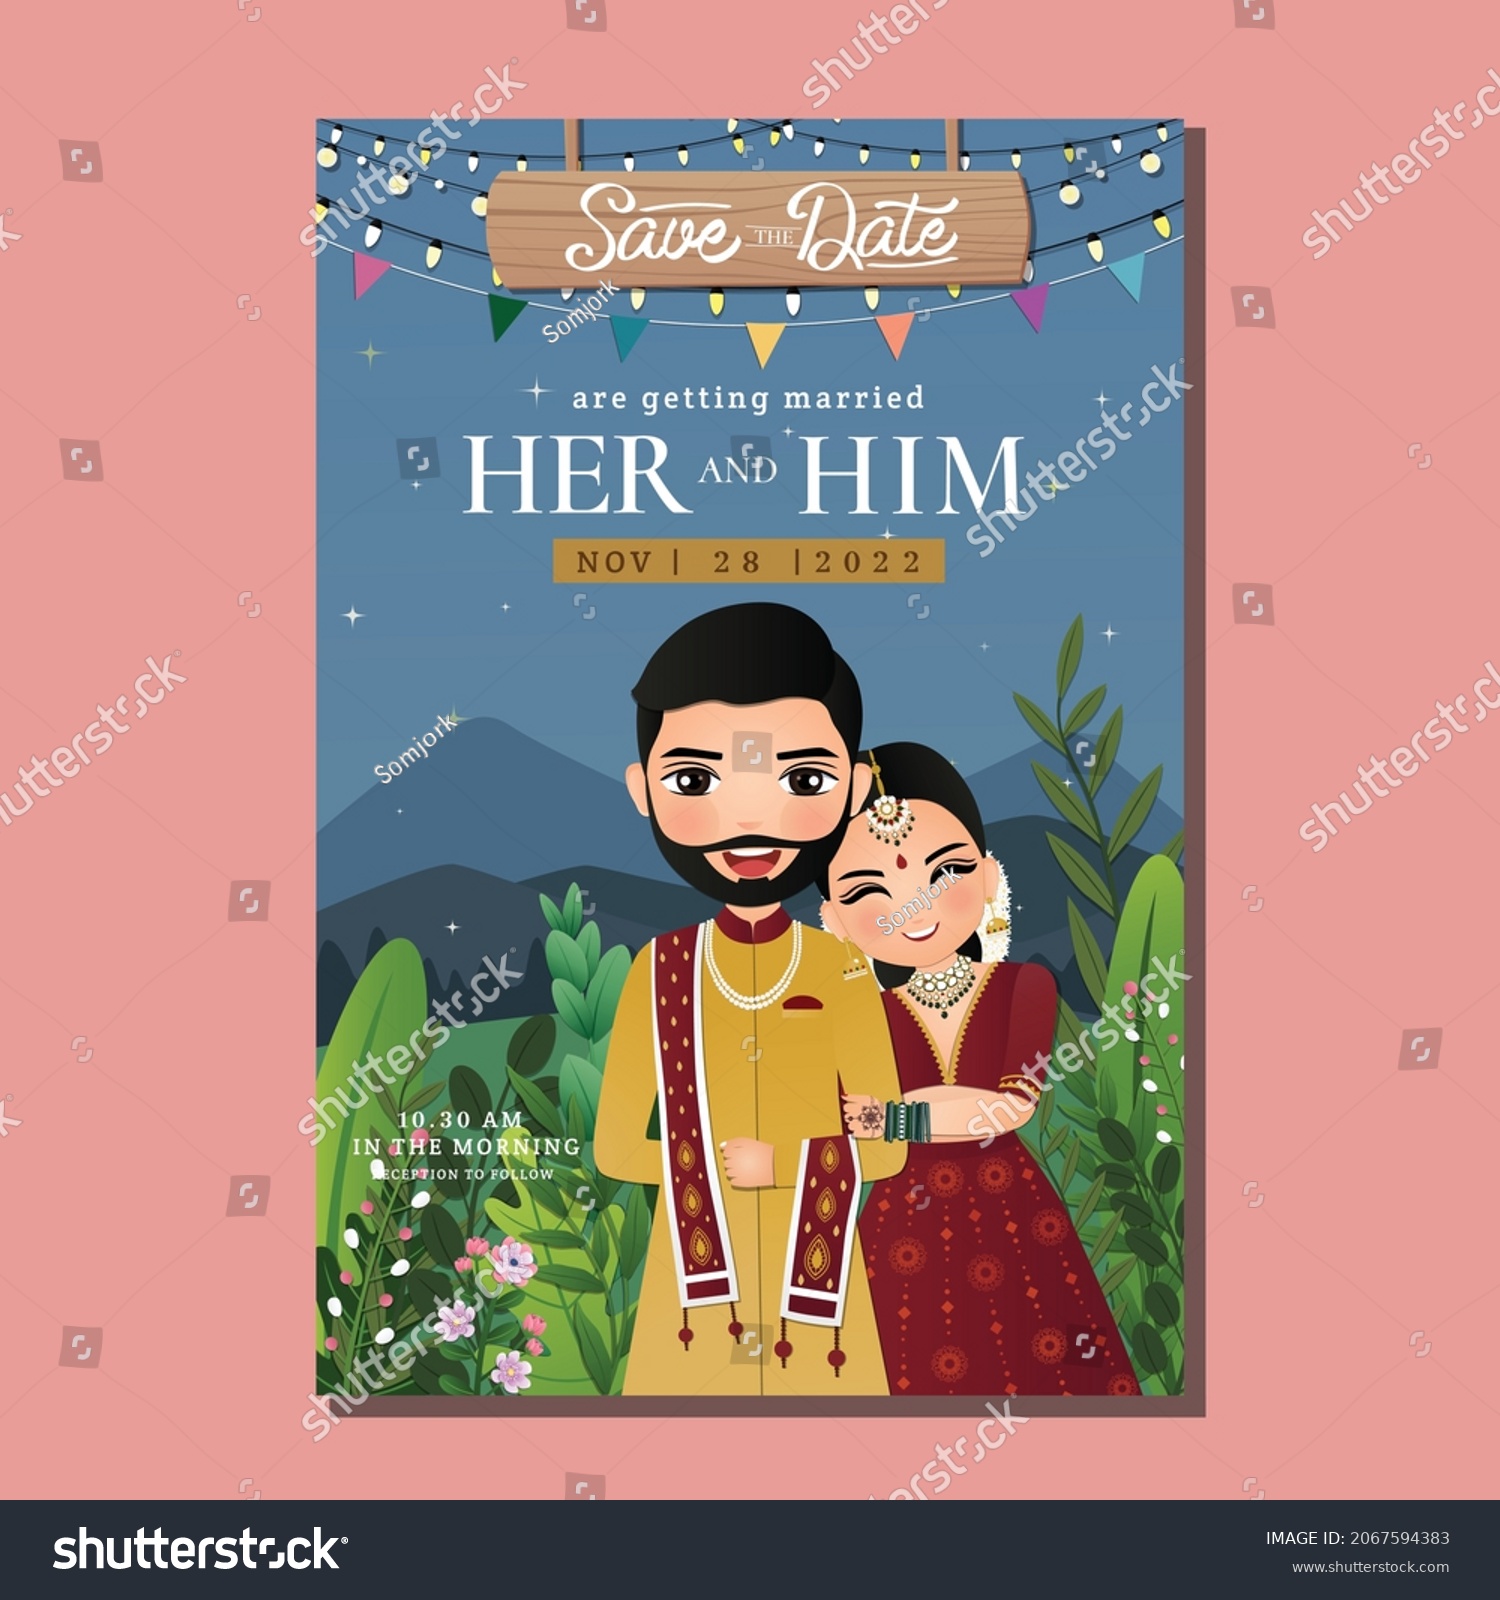 SVG of Cute couple in traditional indian dress cartoon character.Romantic wedding invitation card svg